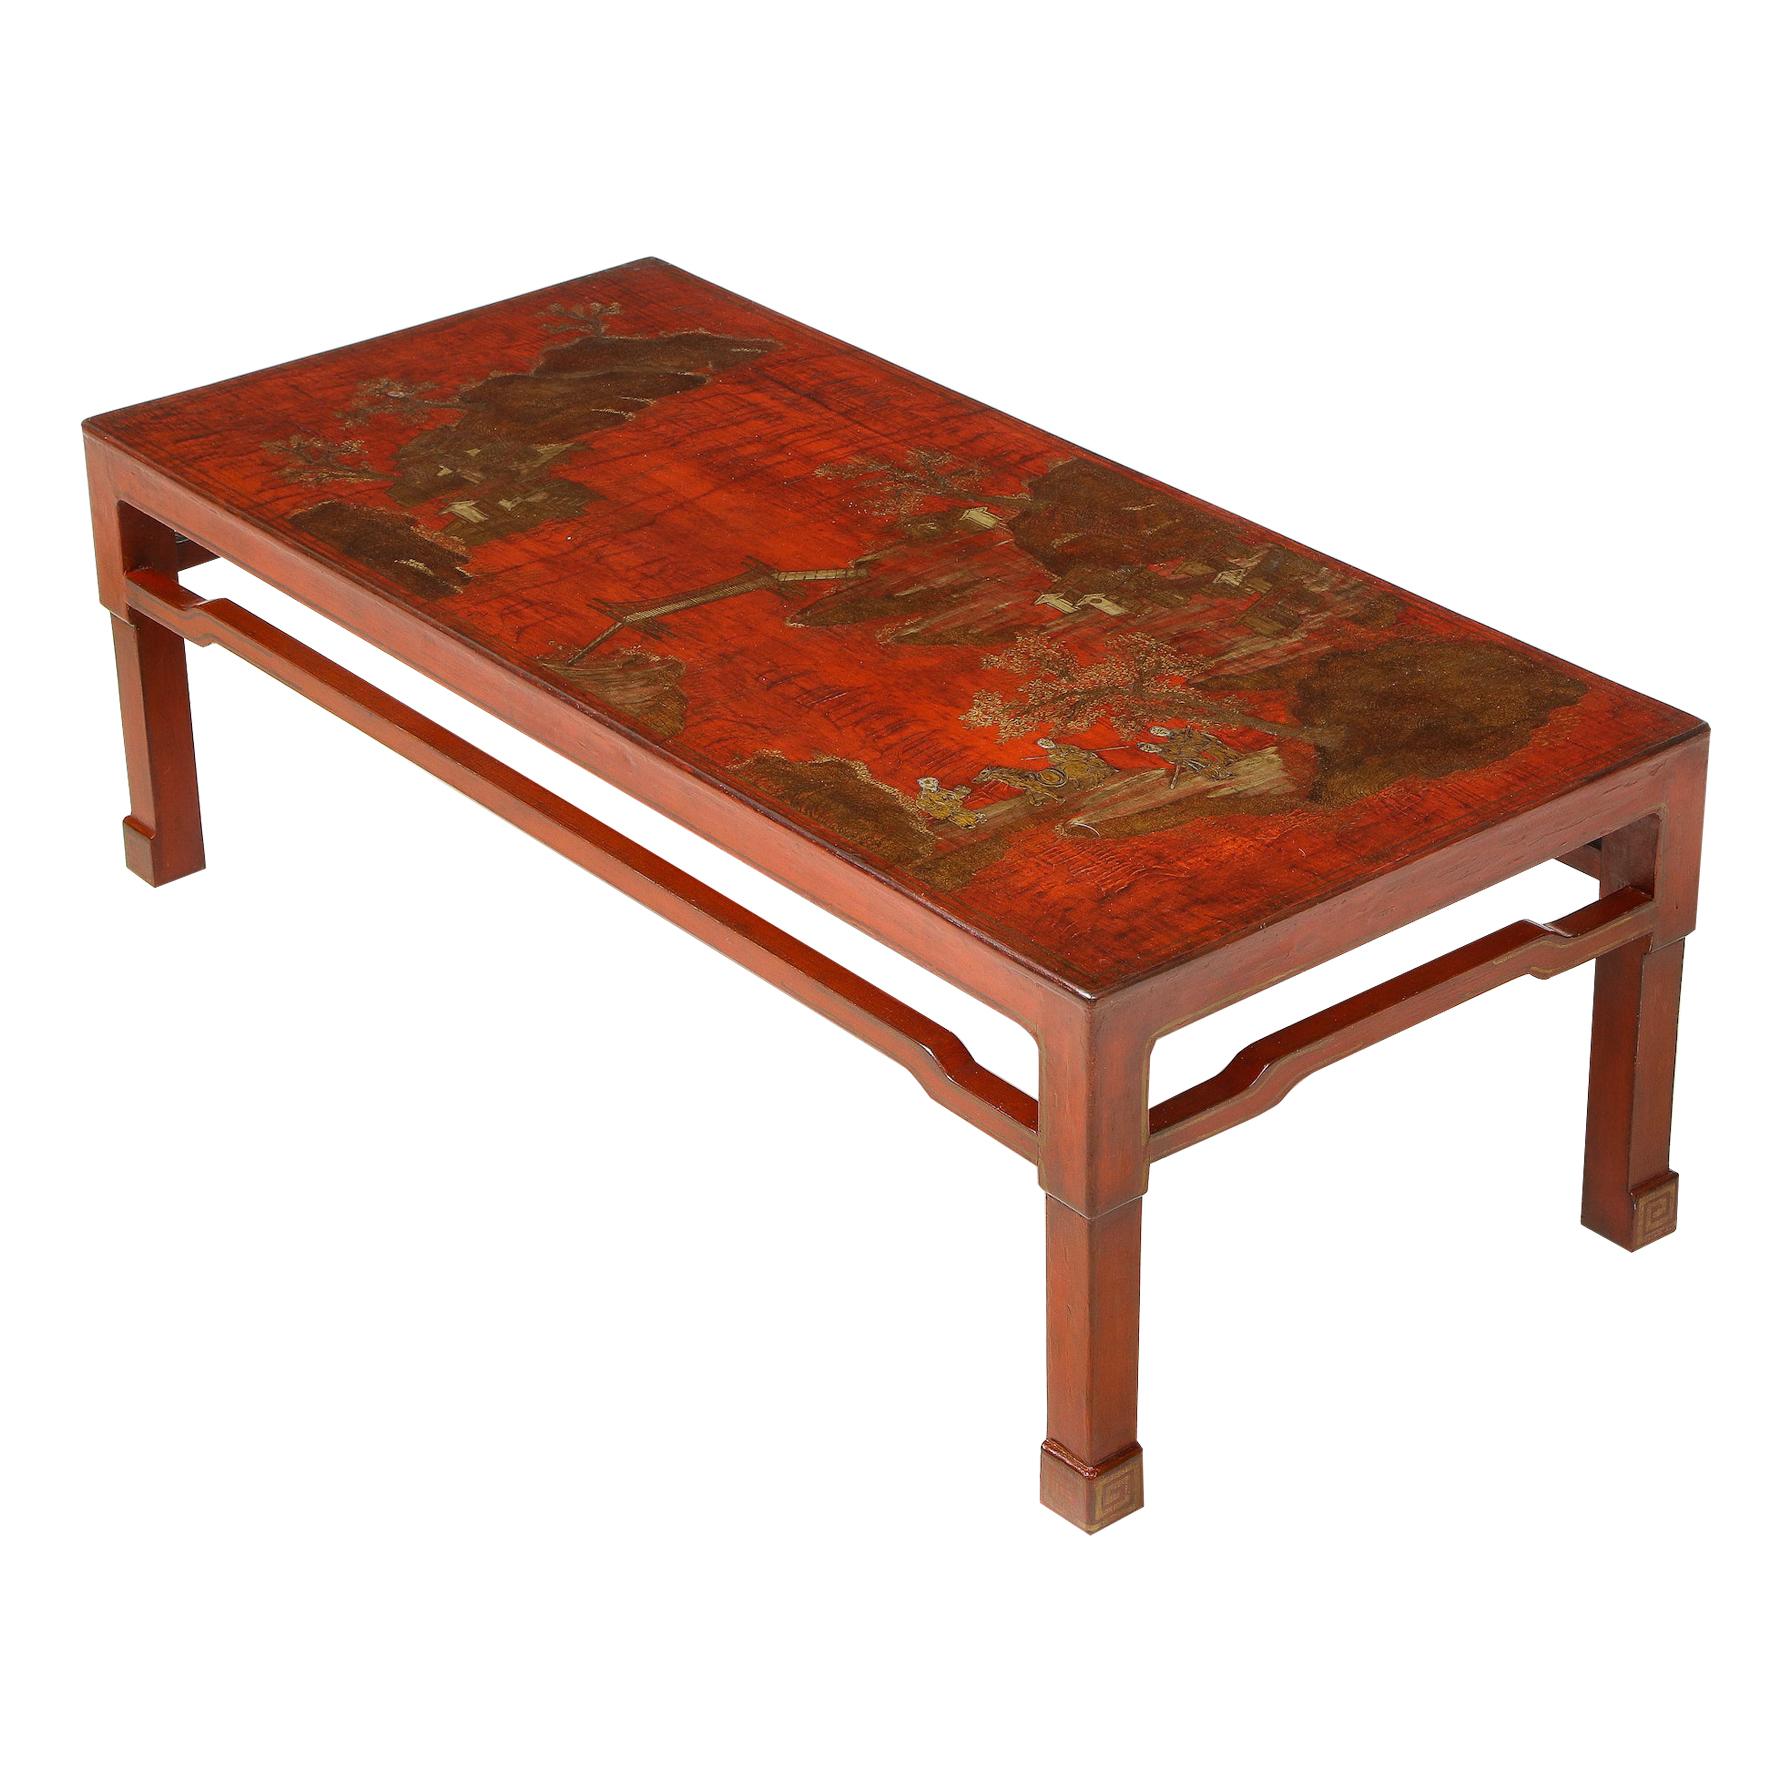 Scarlet Red Lacquered and Gilt Chinoiserie Low Table